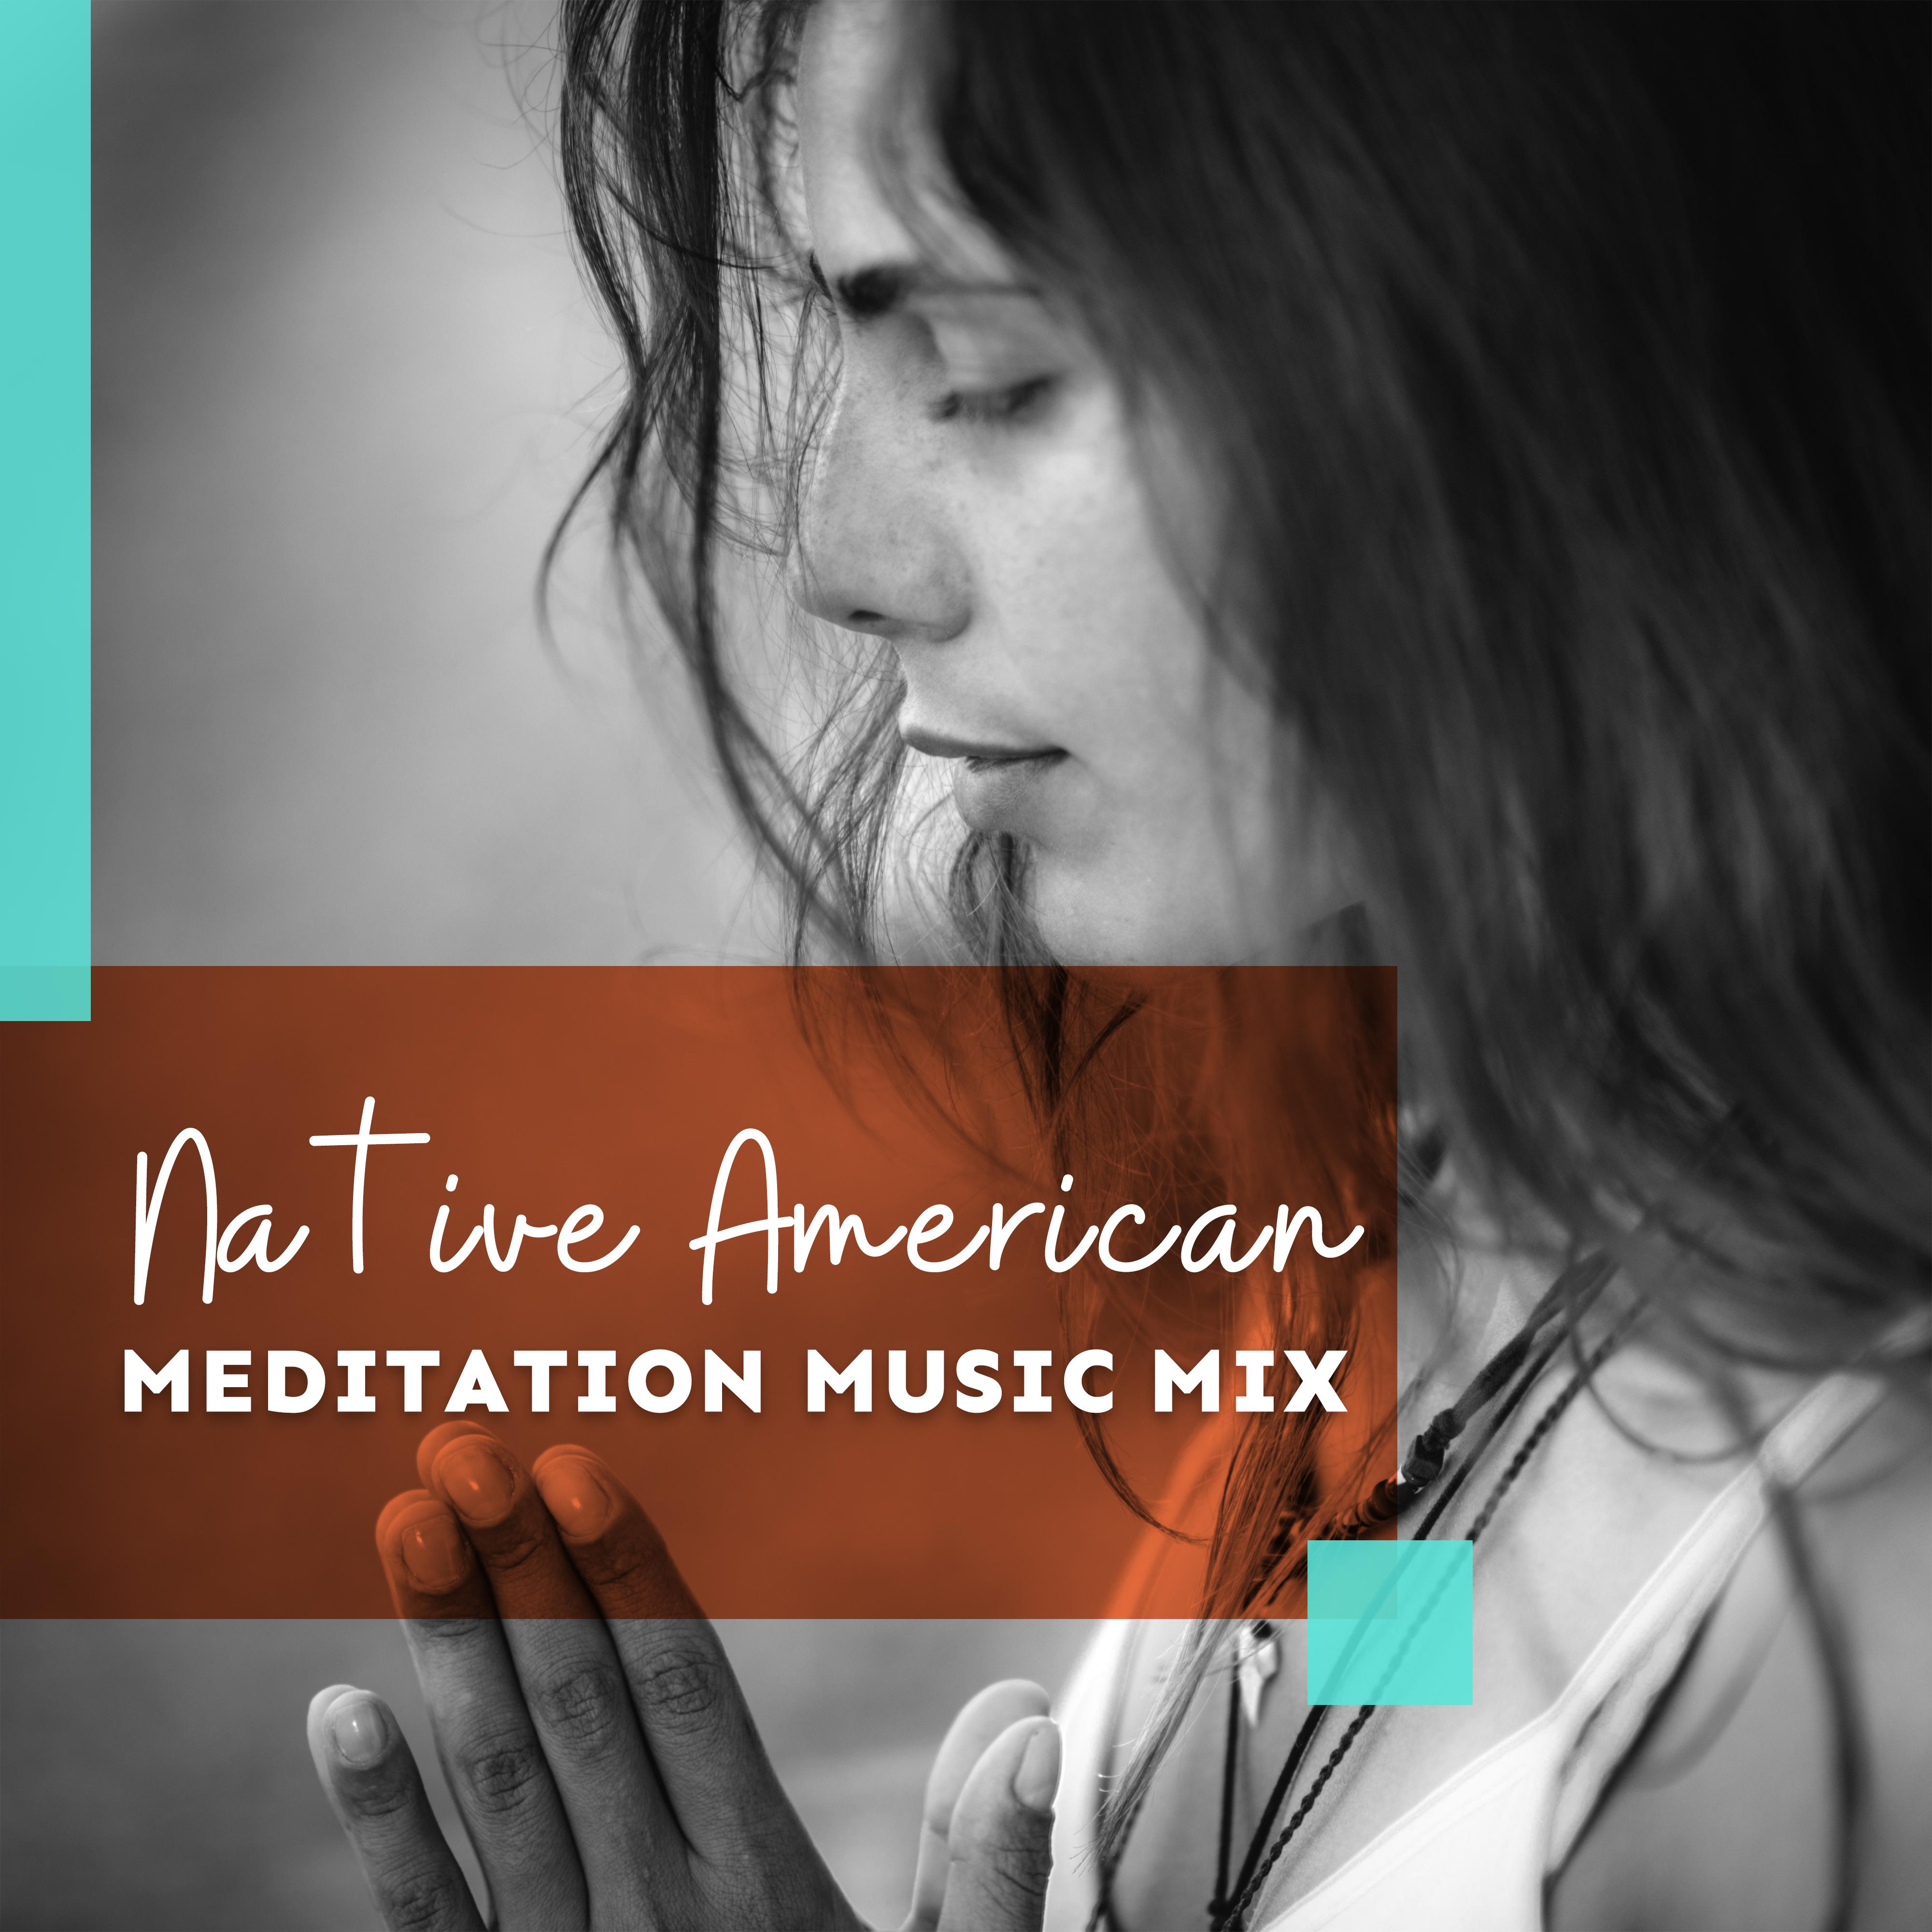 Native American Meditation Music Mix – Compilation of 2019 New Age Ambient Music with Native Instruments & Sounds